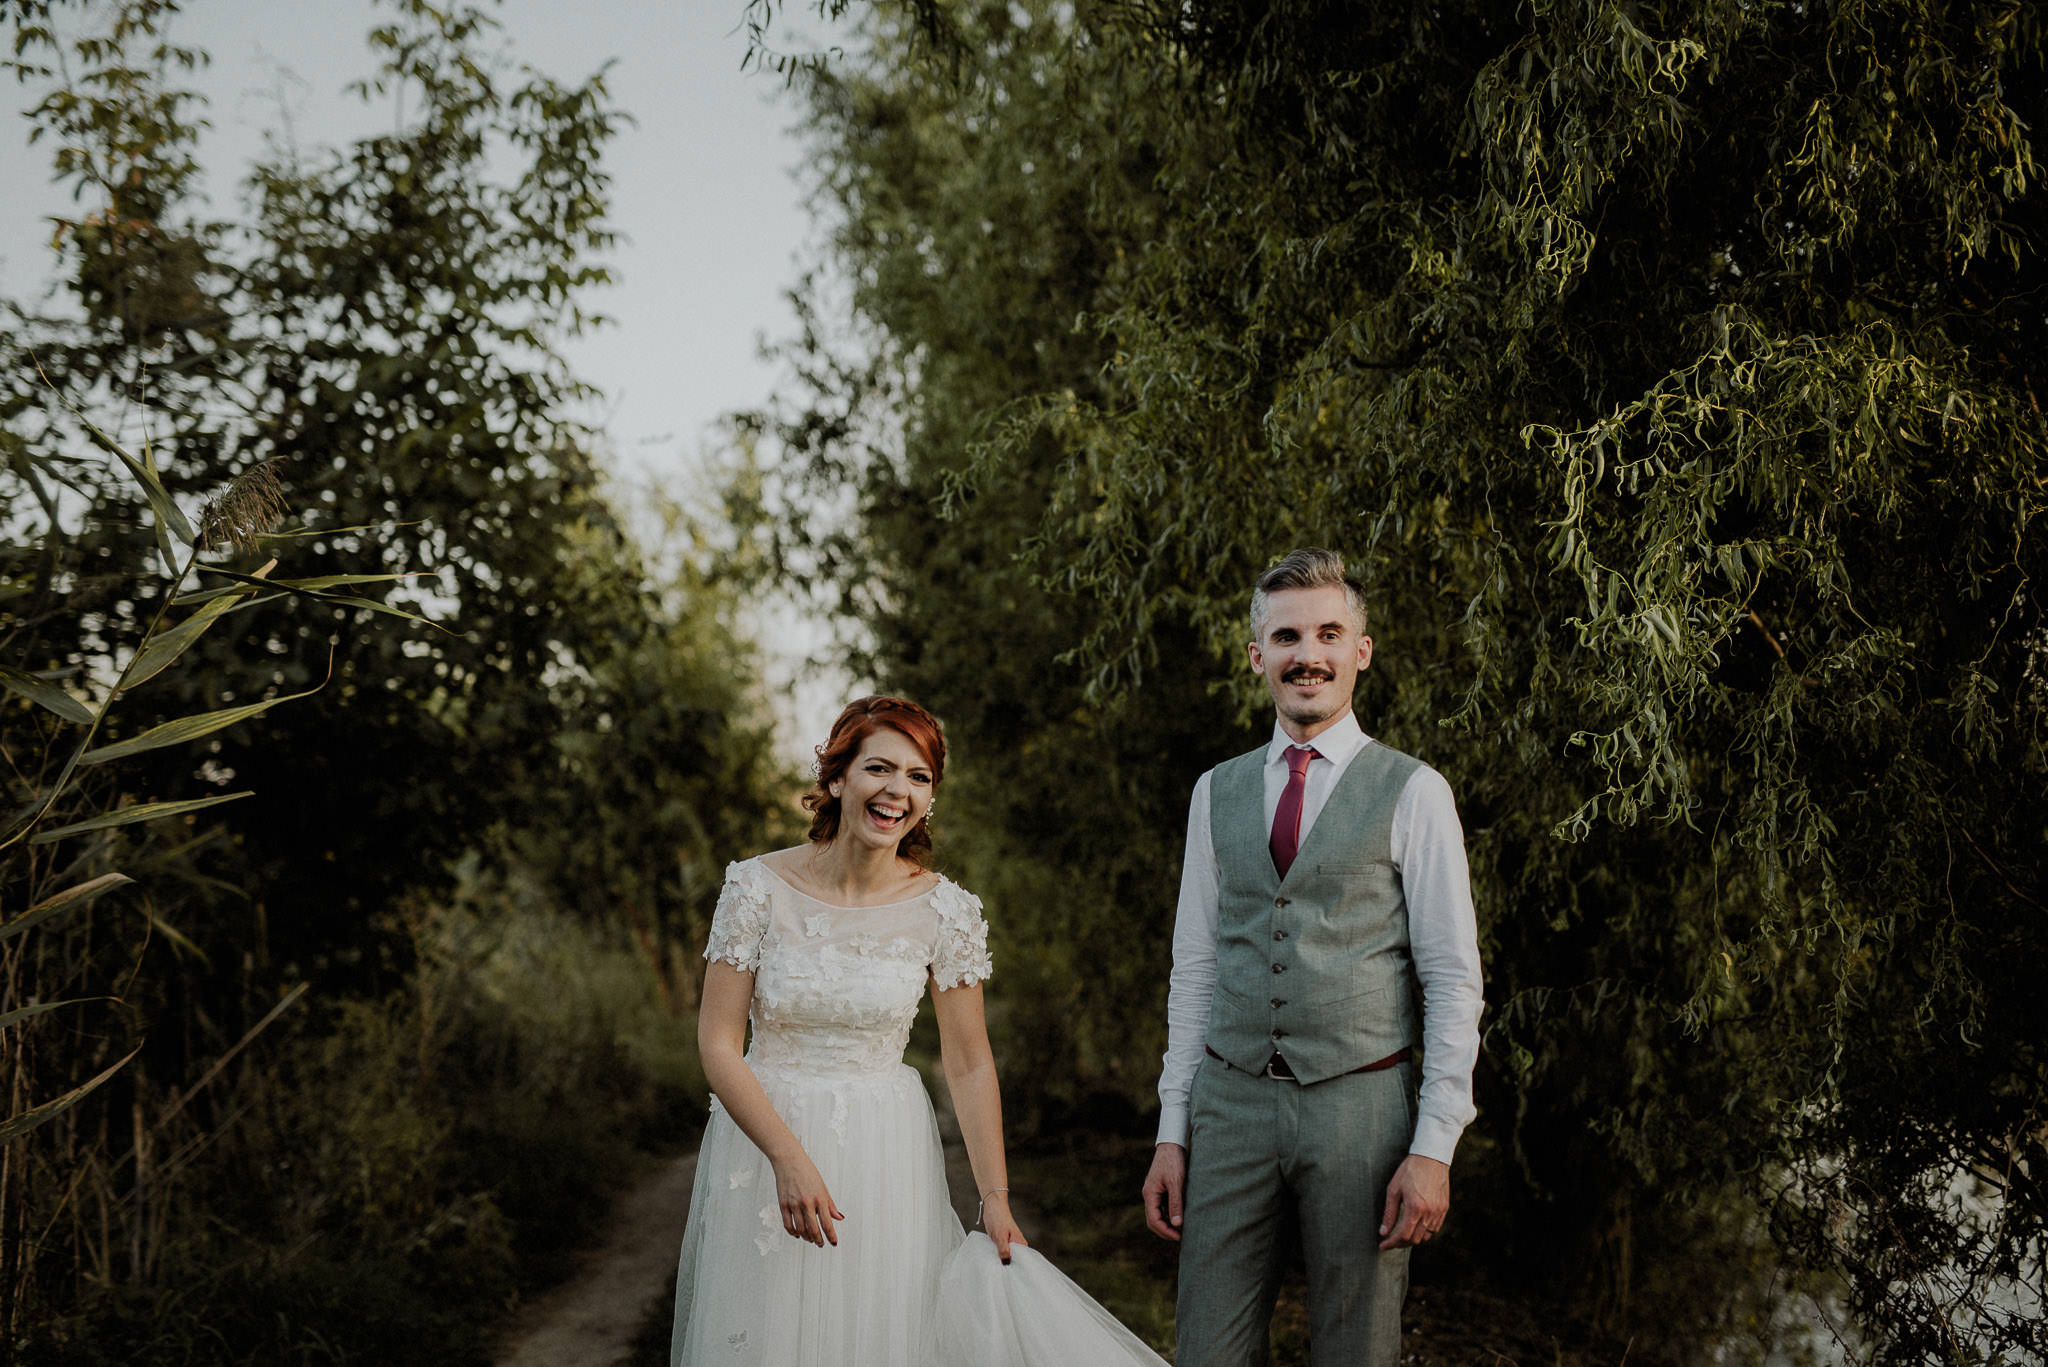 intimate garden wedding in autumn, surrounded by vegetation and a candid portrait of a fun bride and groom